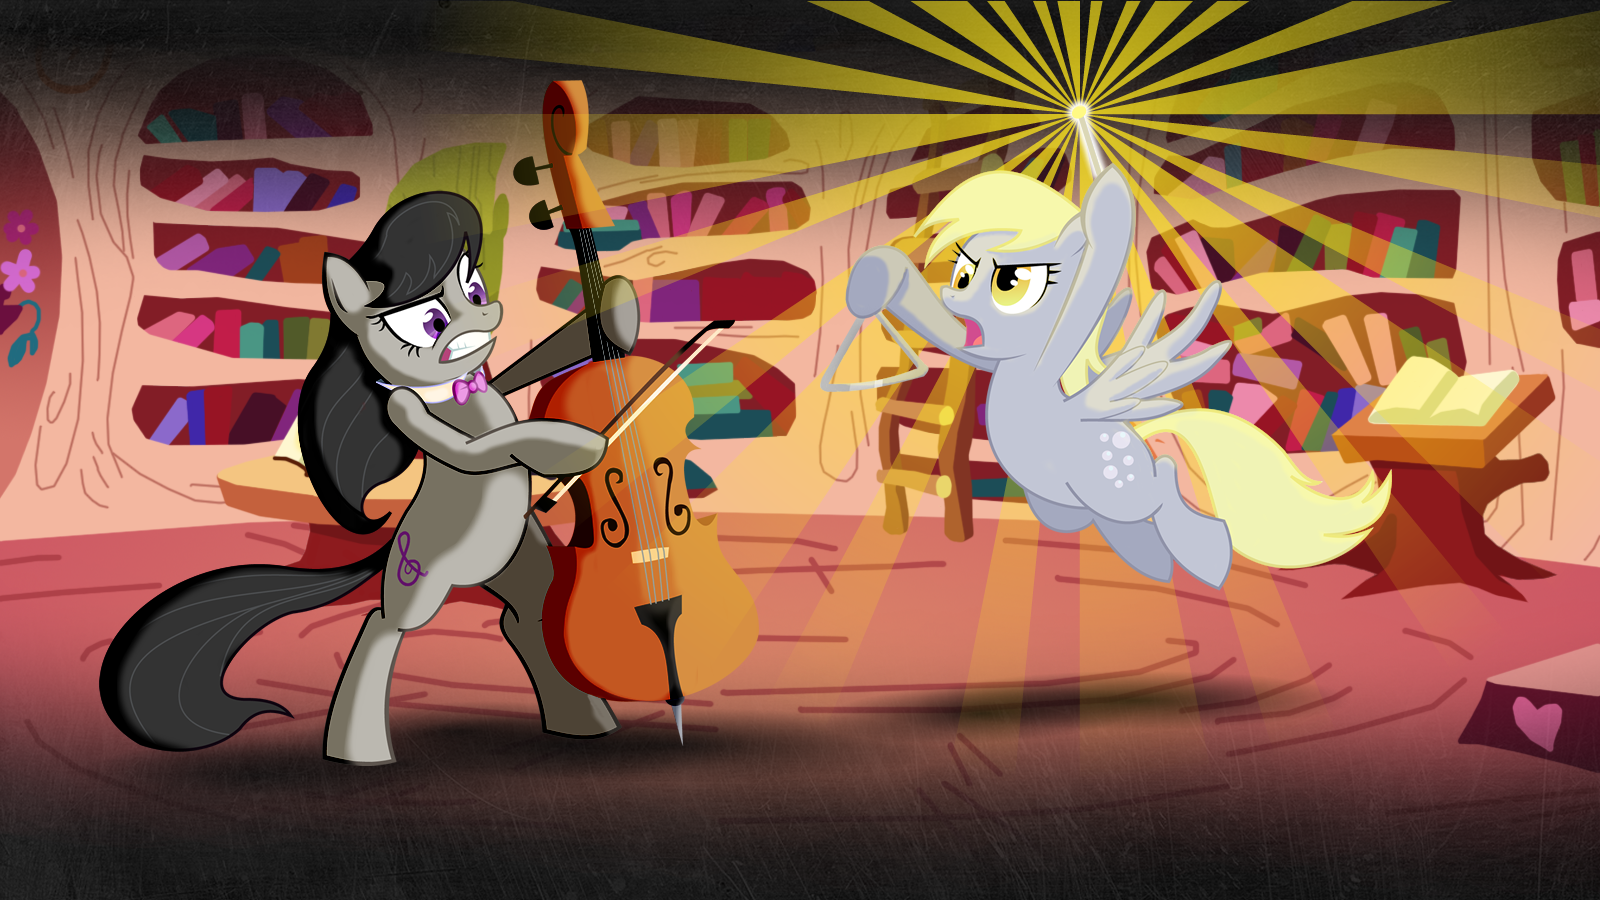 Power Triangle - Octavia and Derpy Wallpaper by smokeybacon